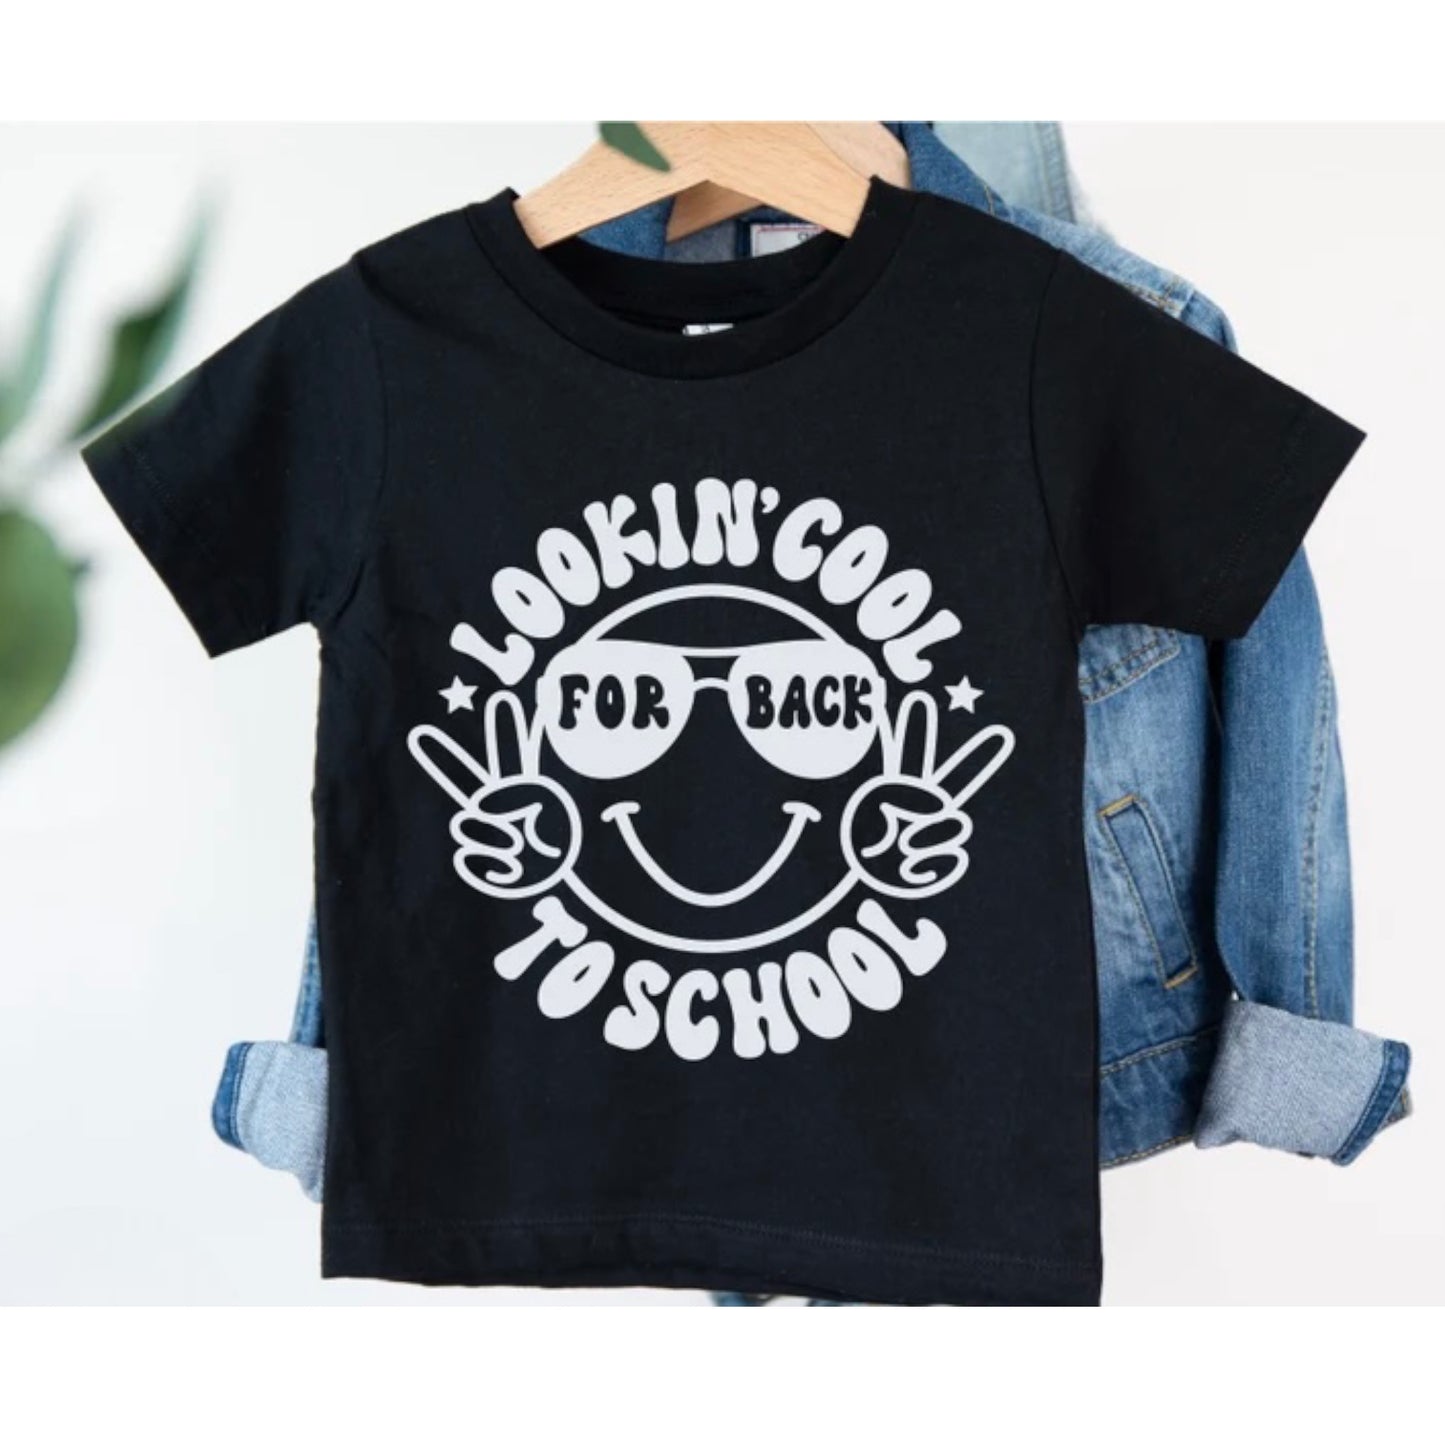 Lookin’ Cool For Back To School Tee (2)